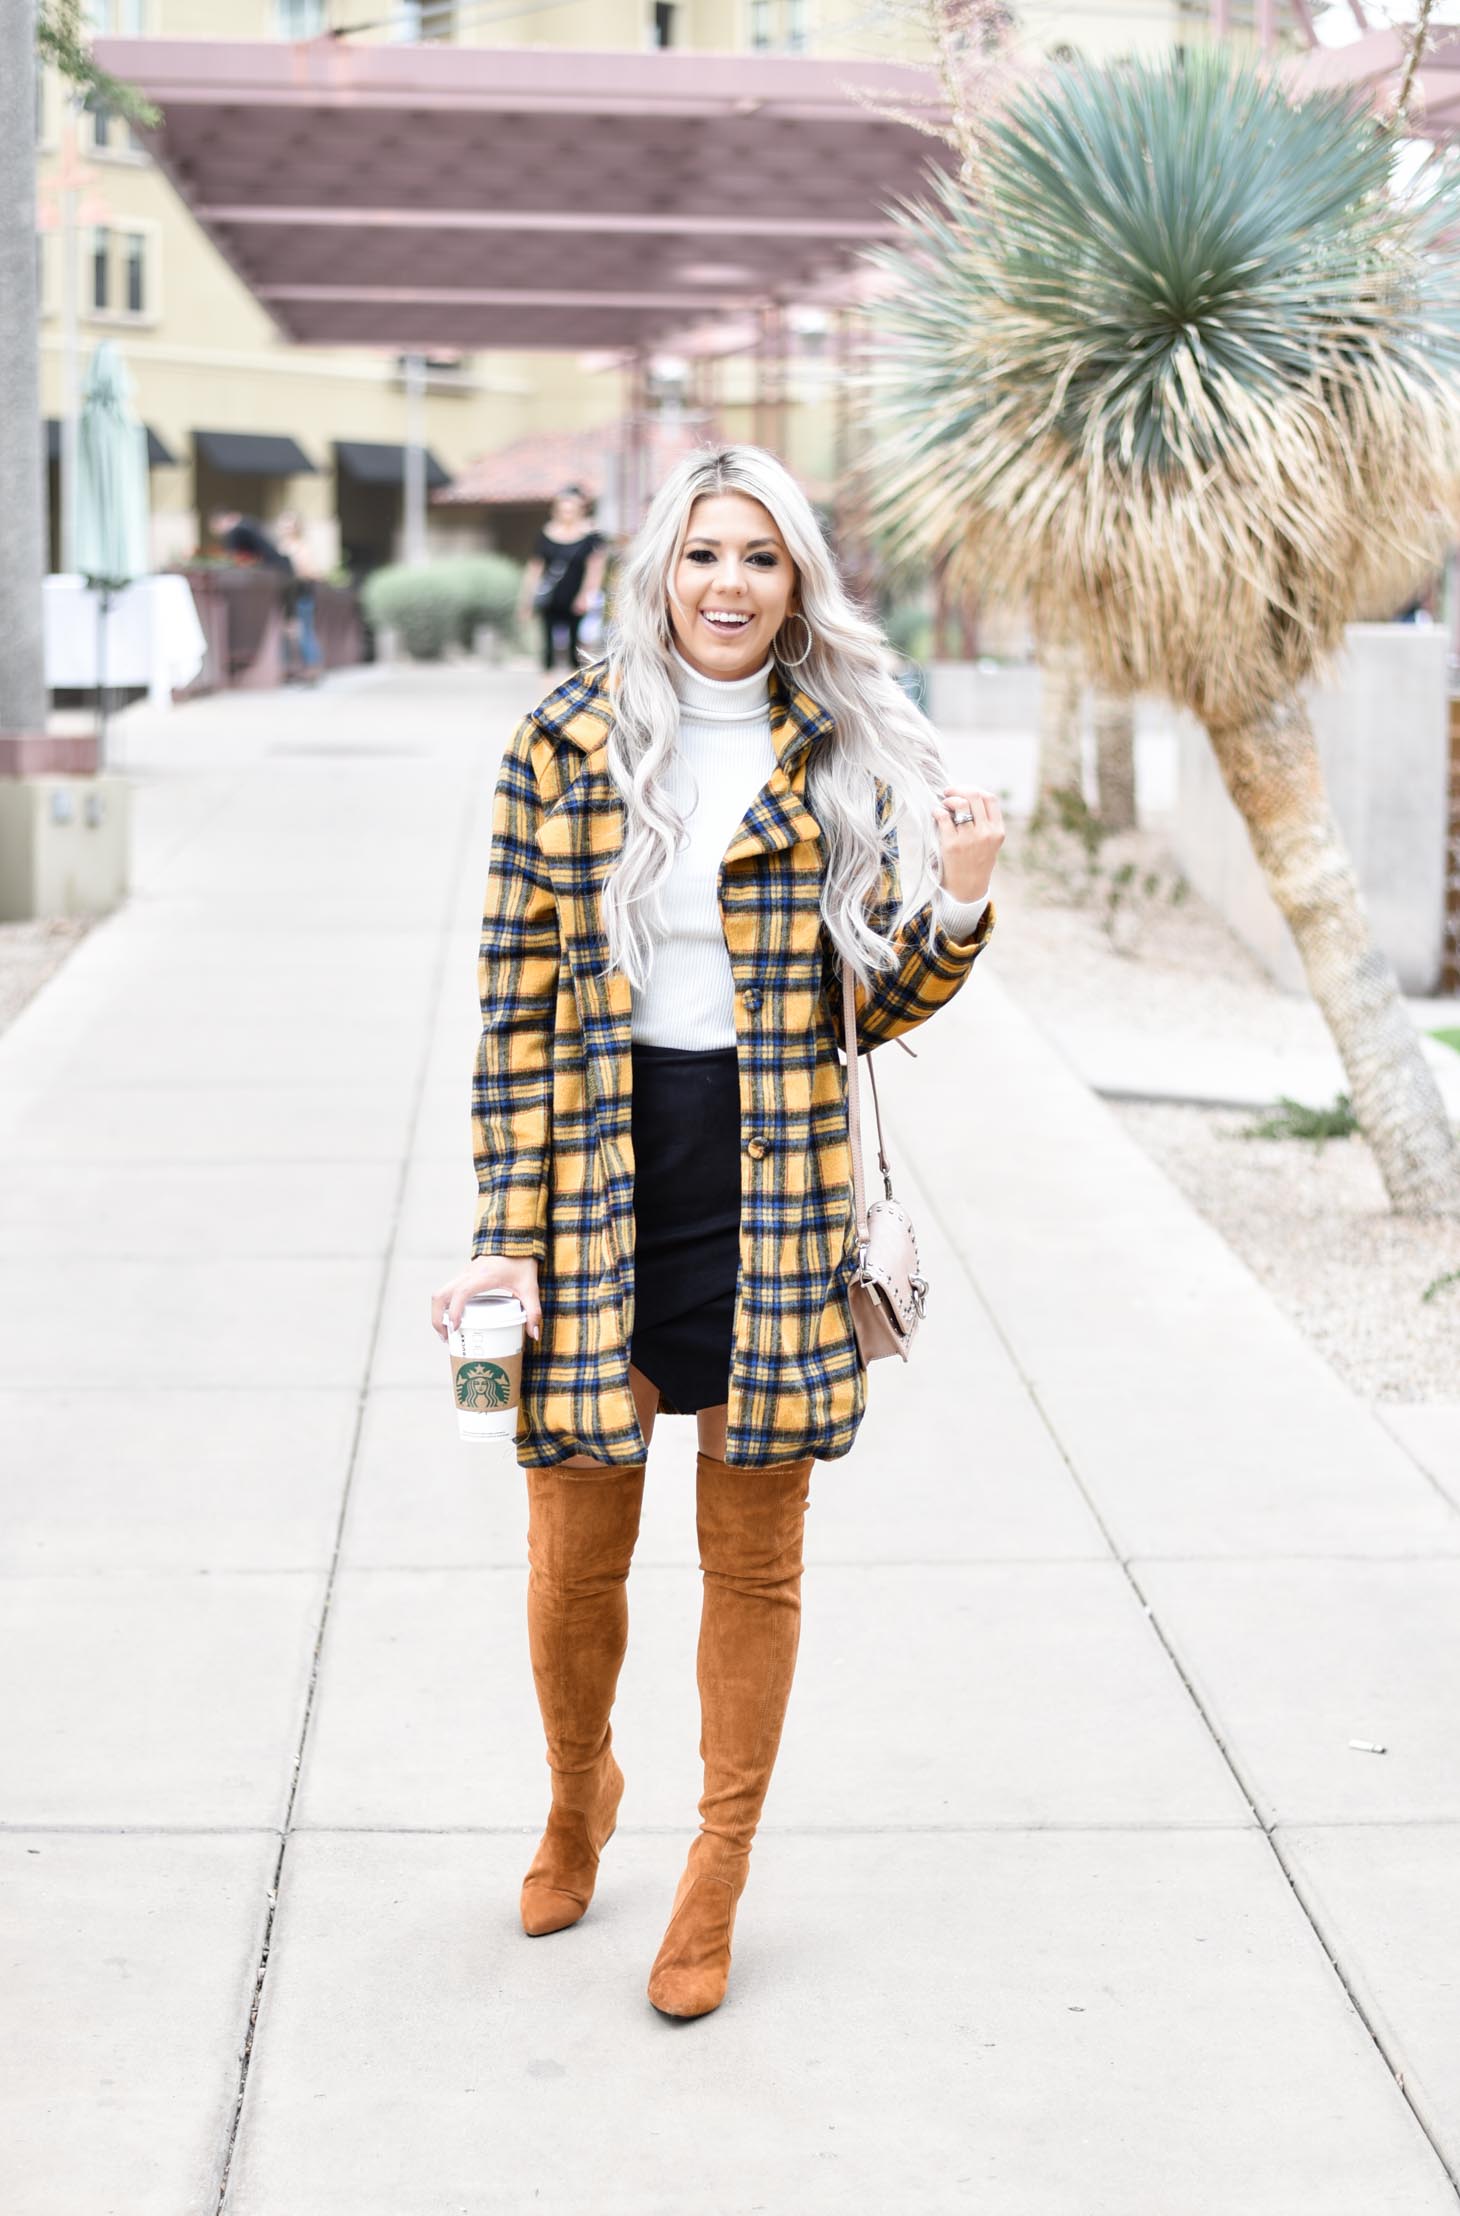 Erin Elizabeth of Wink and a Twirl shares this fabulous plaid coat from Shop Priceless